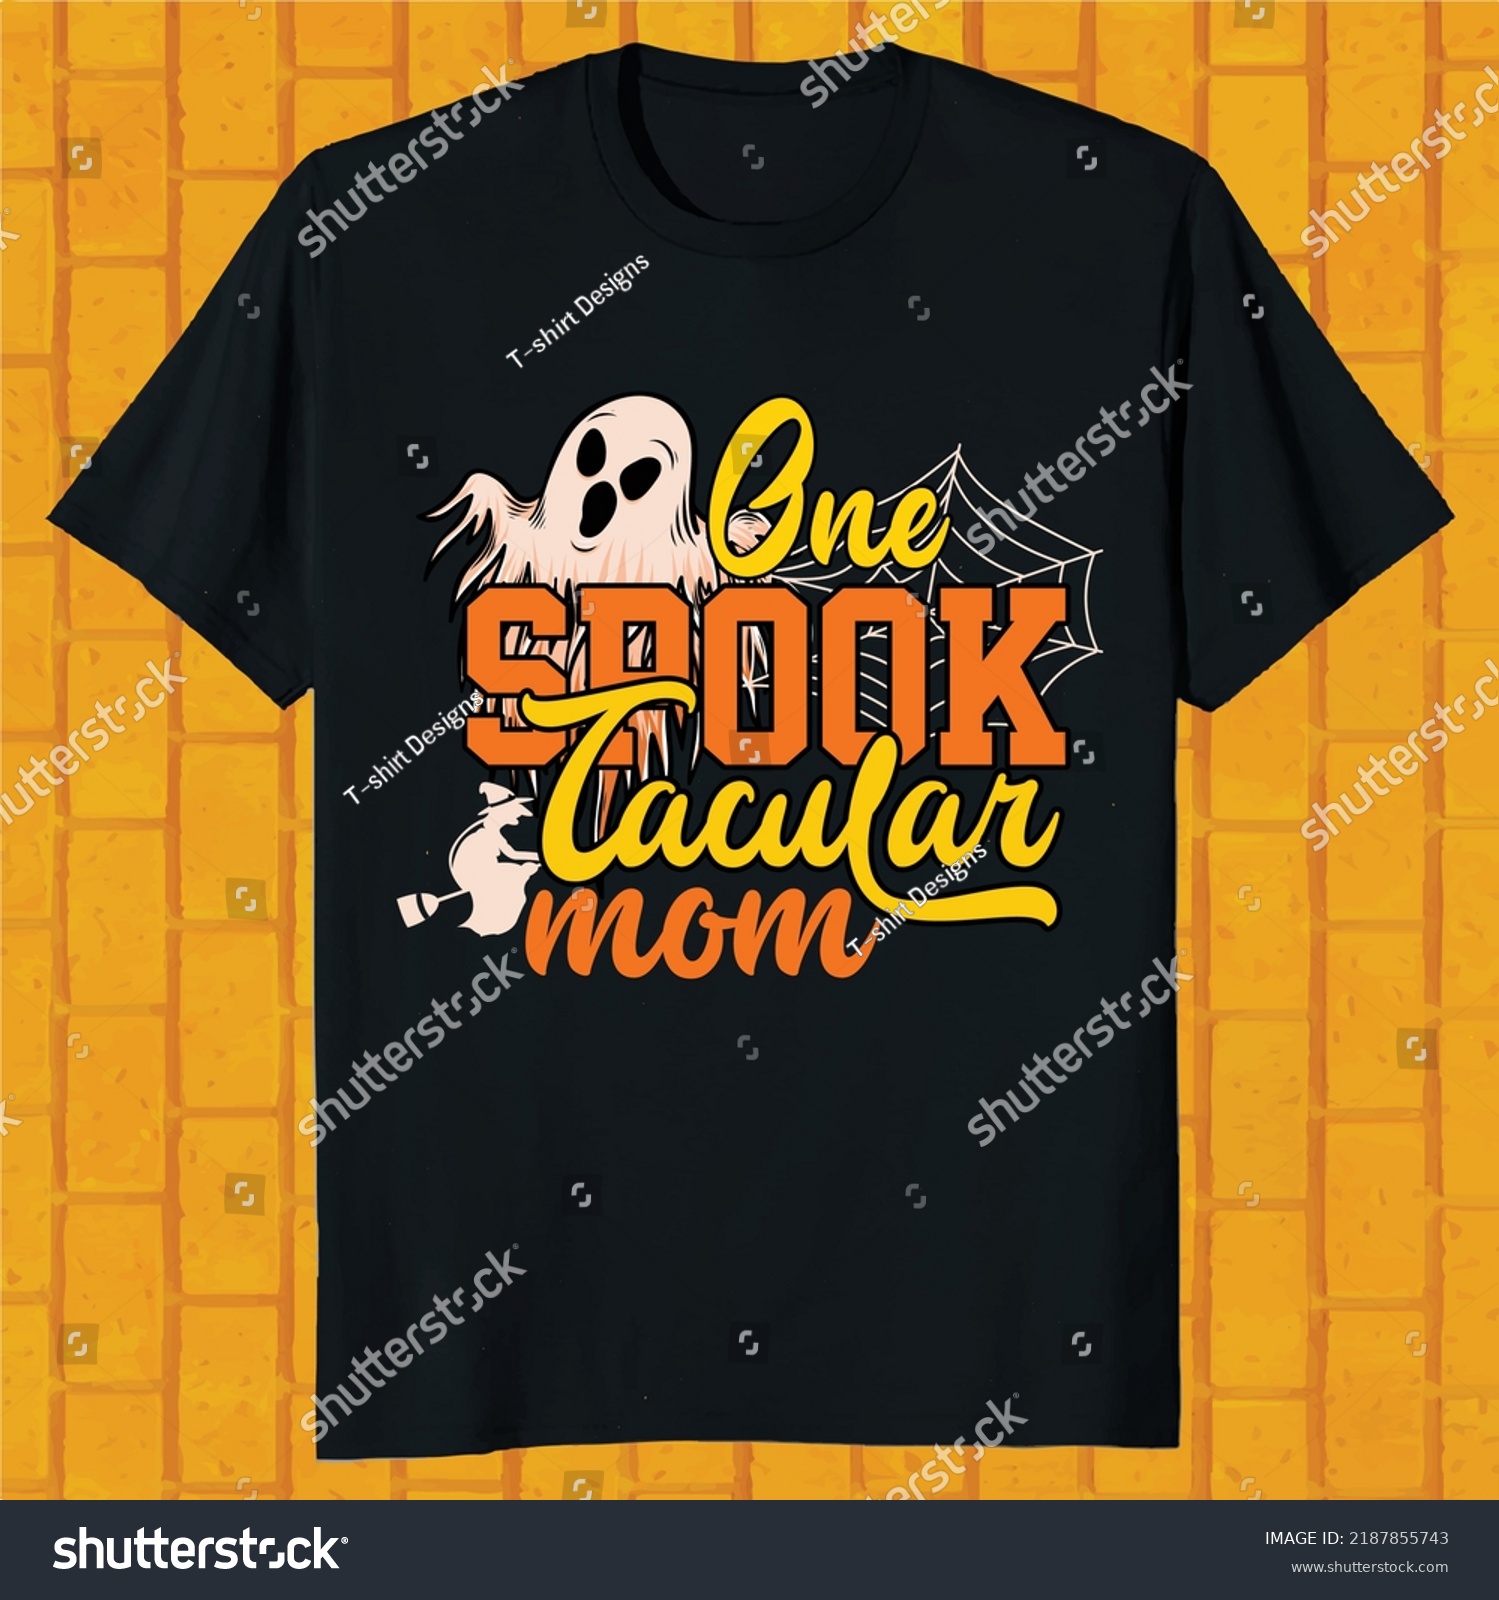 SVG of one spook tacular mom hello ween t-shirt design svg